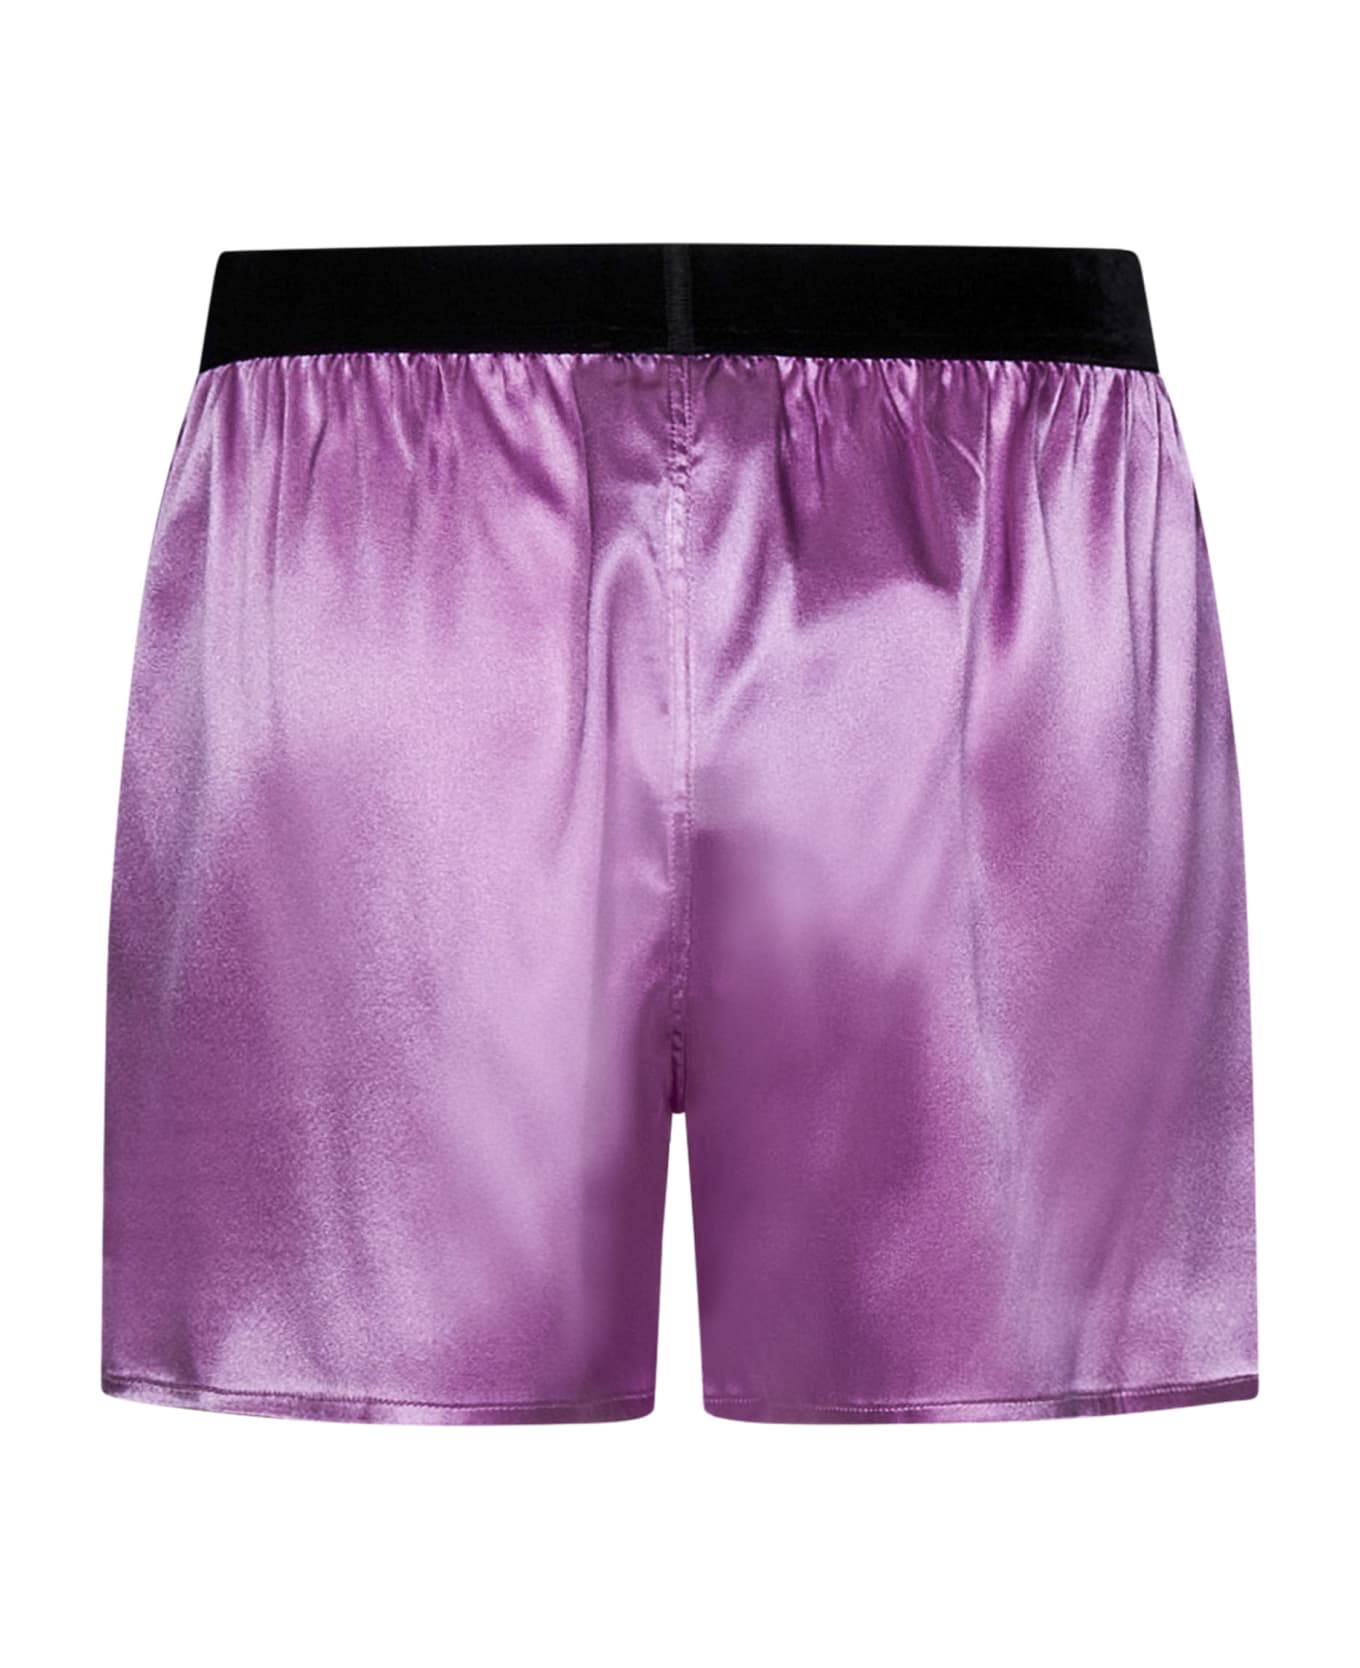 Tom Ford Shorts - Pink